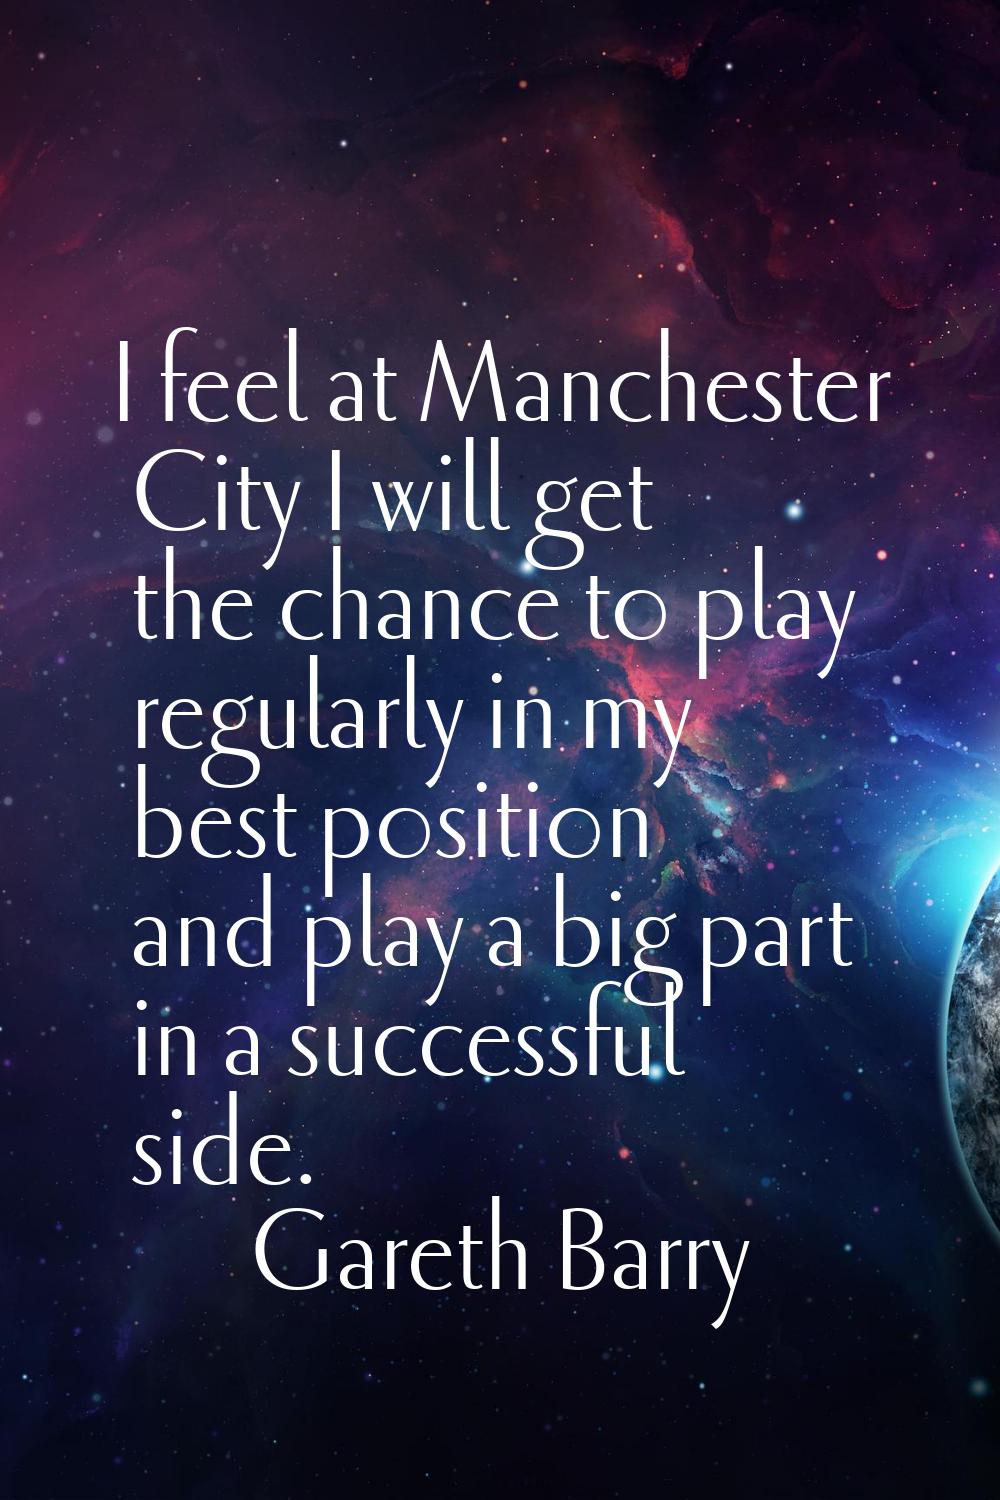 I feel at Manchester City I will get the chance to play regularly in my best position and play a bi